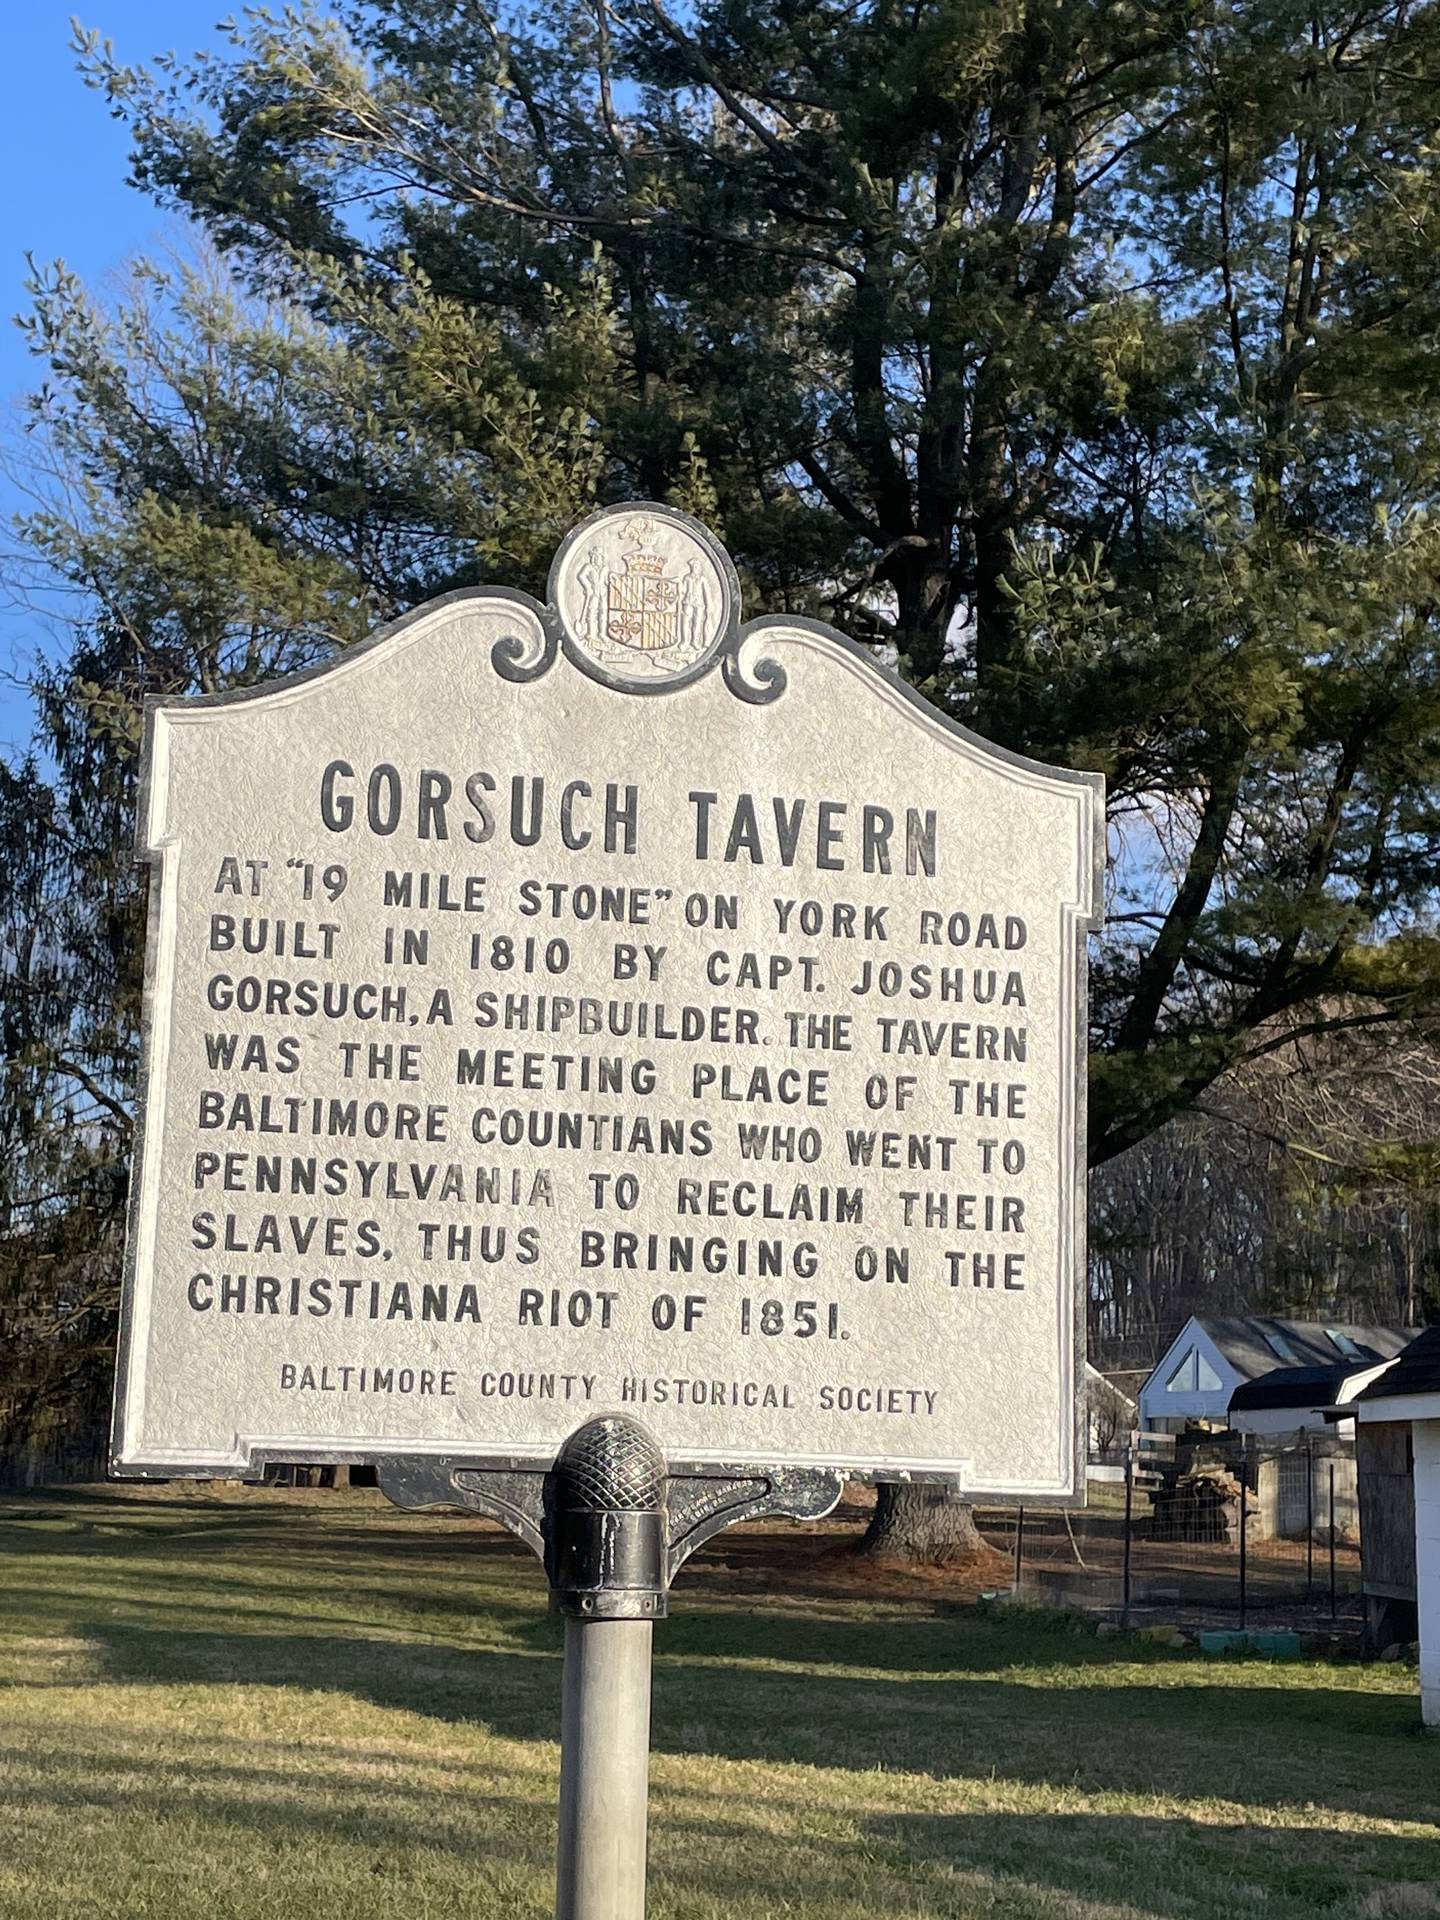 GorsuchtavernBCHS: The historical marker where the Gorsuch posse gathered does not give much information about what happened at Christiana.